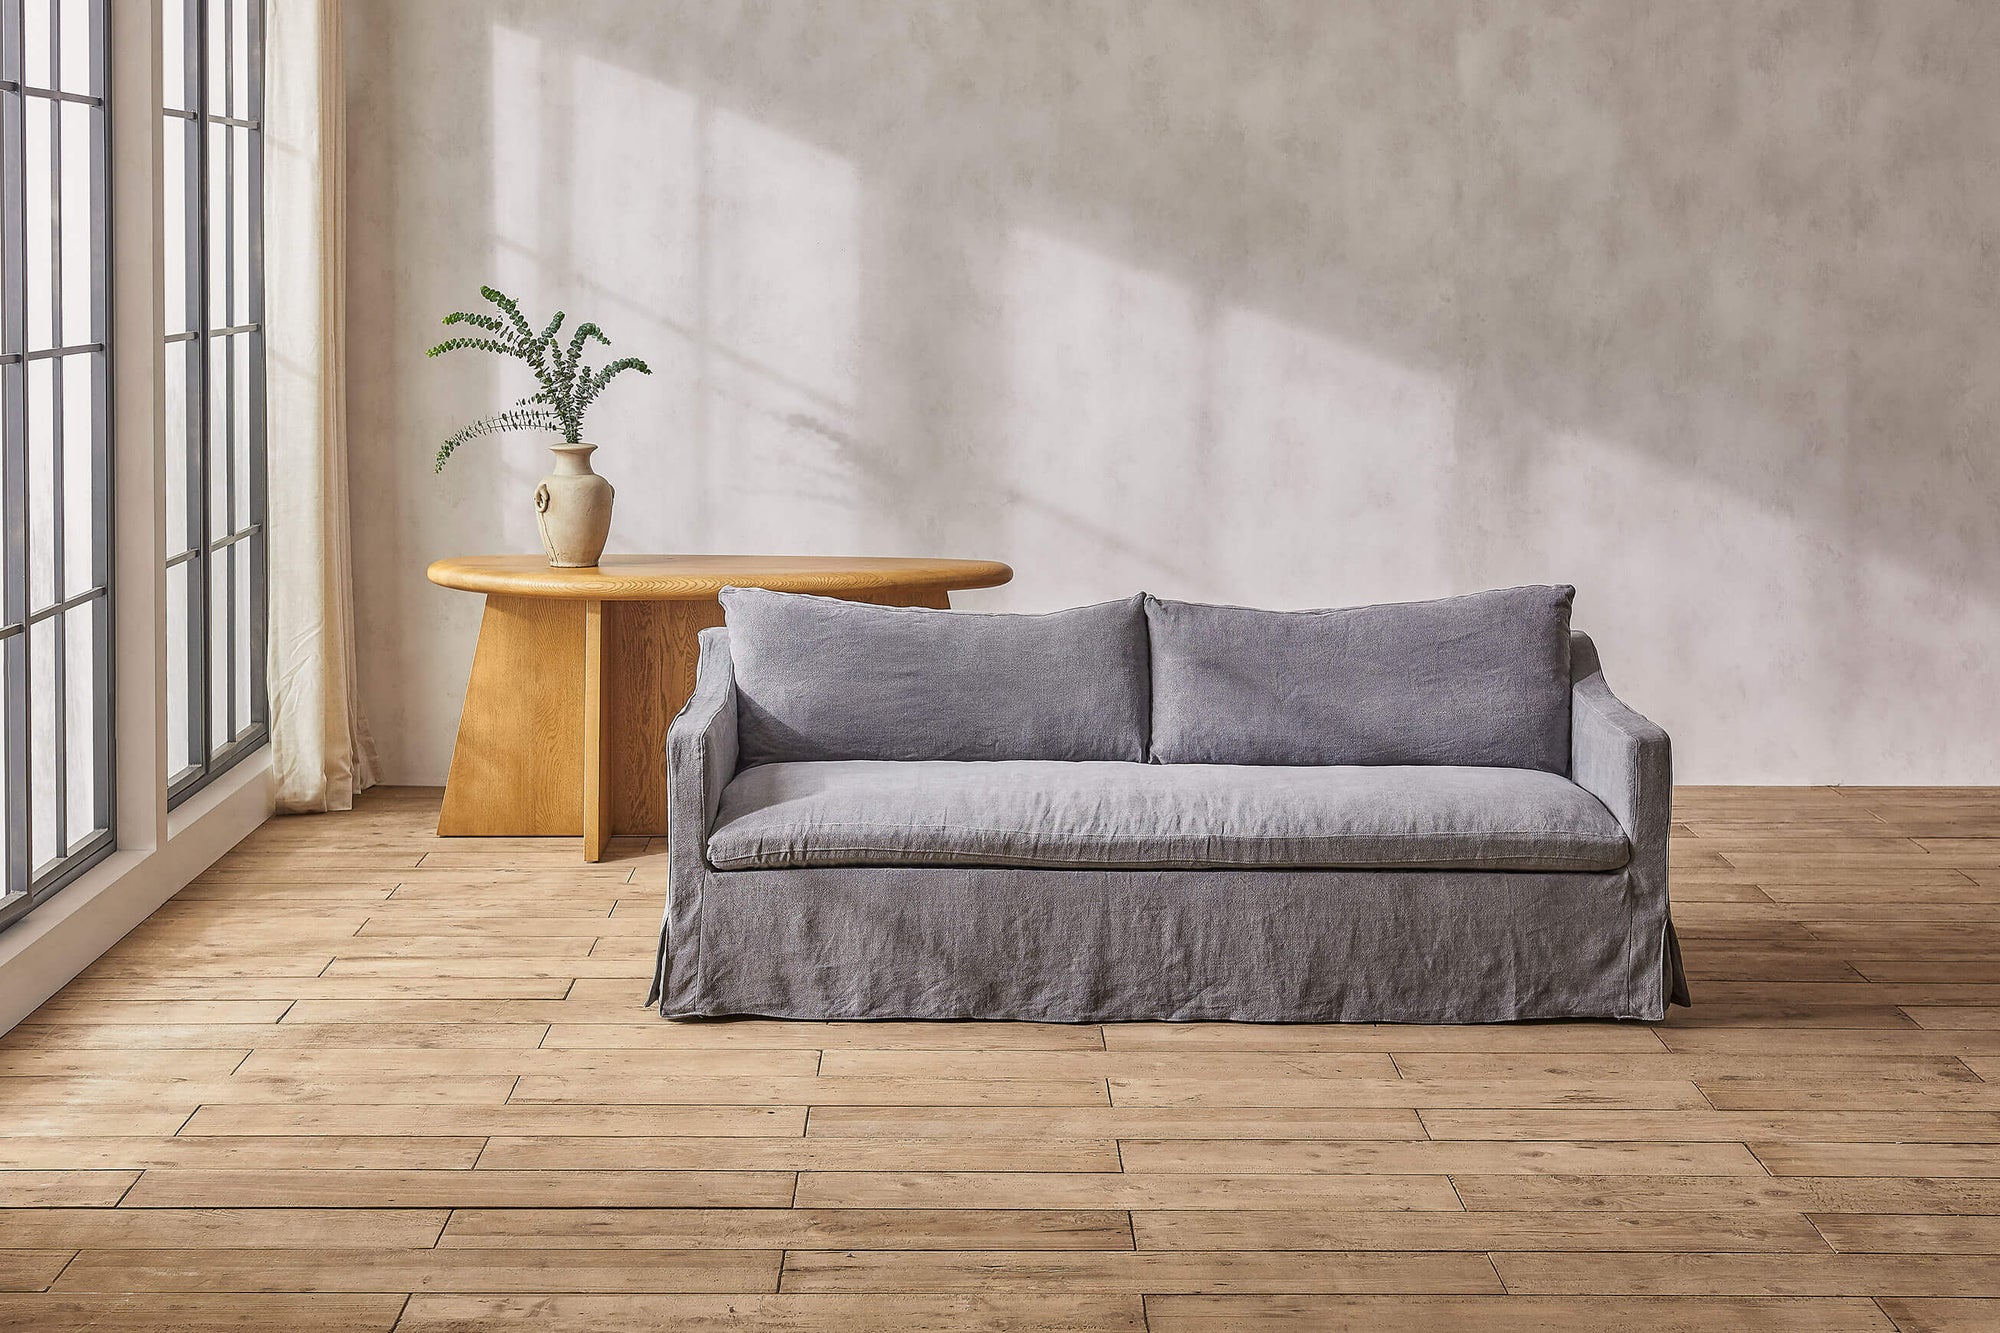 Amelia 84" Sofa in Ink Cap, a medium cool grey Light Weight Linen, in front of an Amina Console Table with a plant on top